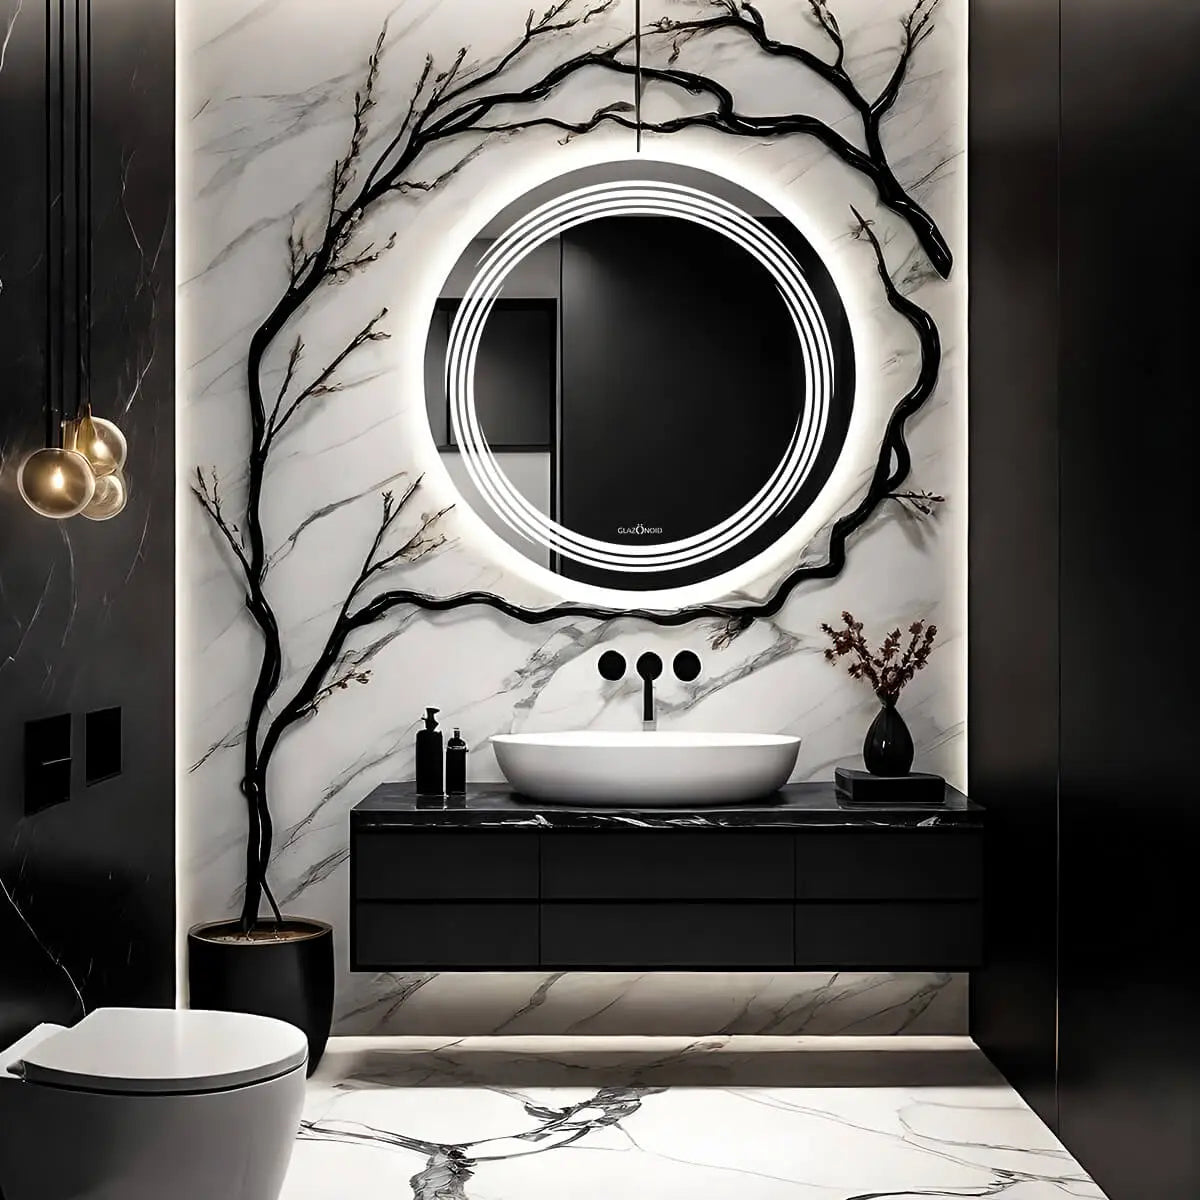 Simple and elegant bathroom design with a white ceramic pedestal sink, toilet, and round LED mirror with a frameless design. Branches are mounted on the wall for a natural touch. This complete bathroom set is perfect for a quick bathroom refresh.